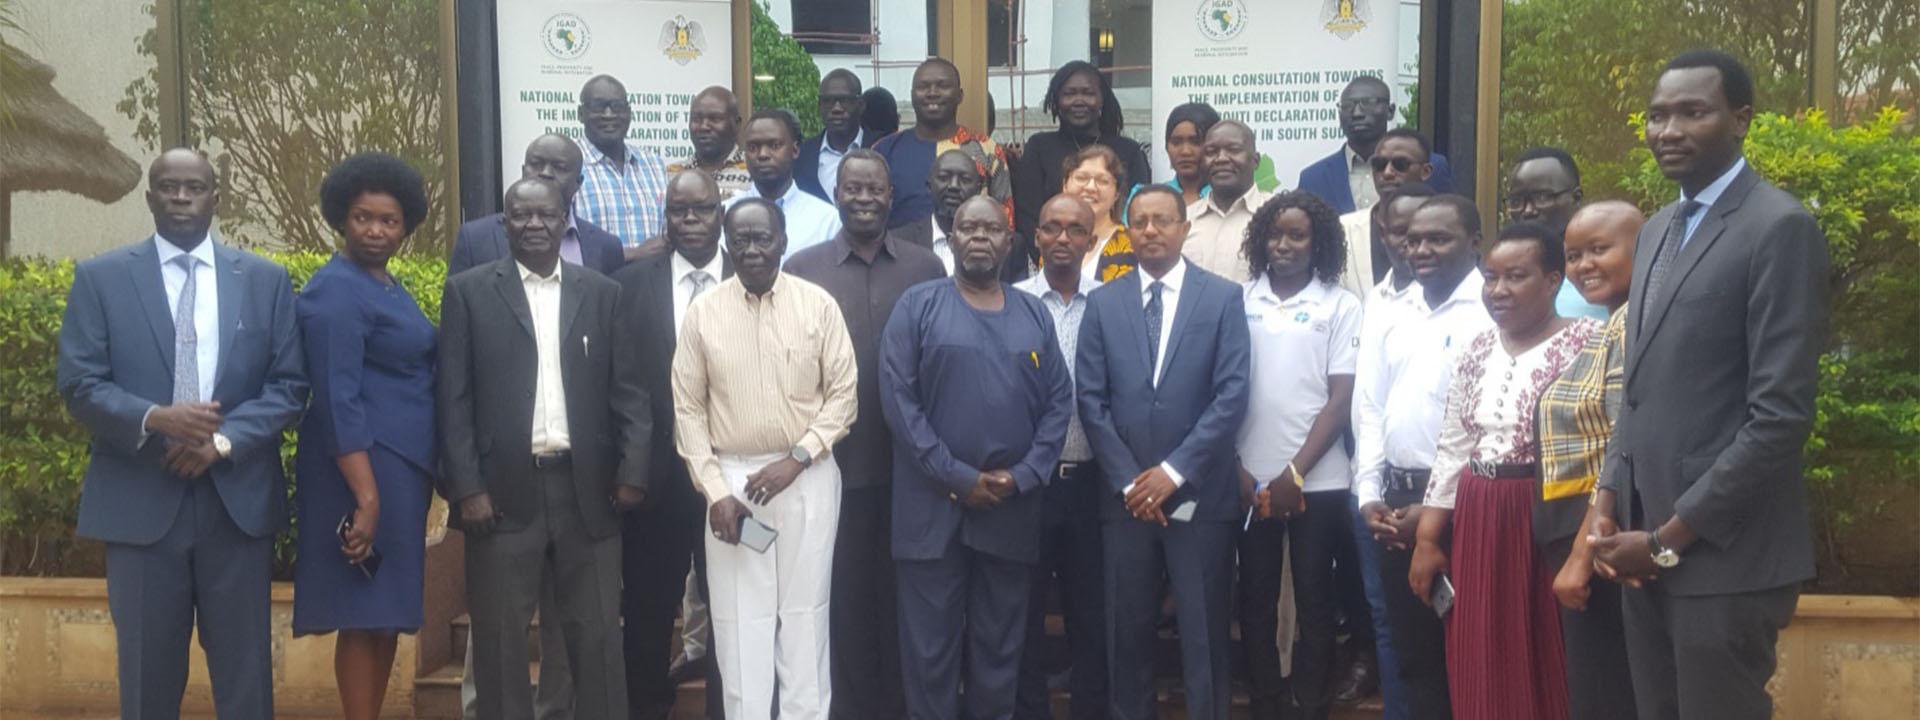 IGAD conducts South Sudan National Consultation meeting on the Implementation of the Djibouti Declaration on Education